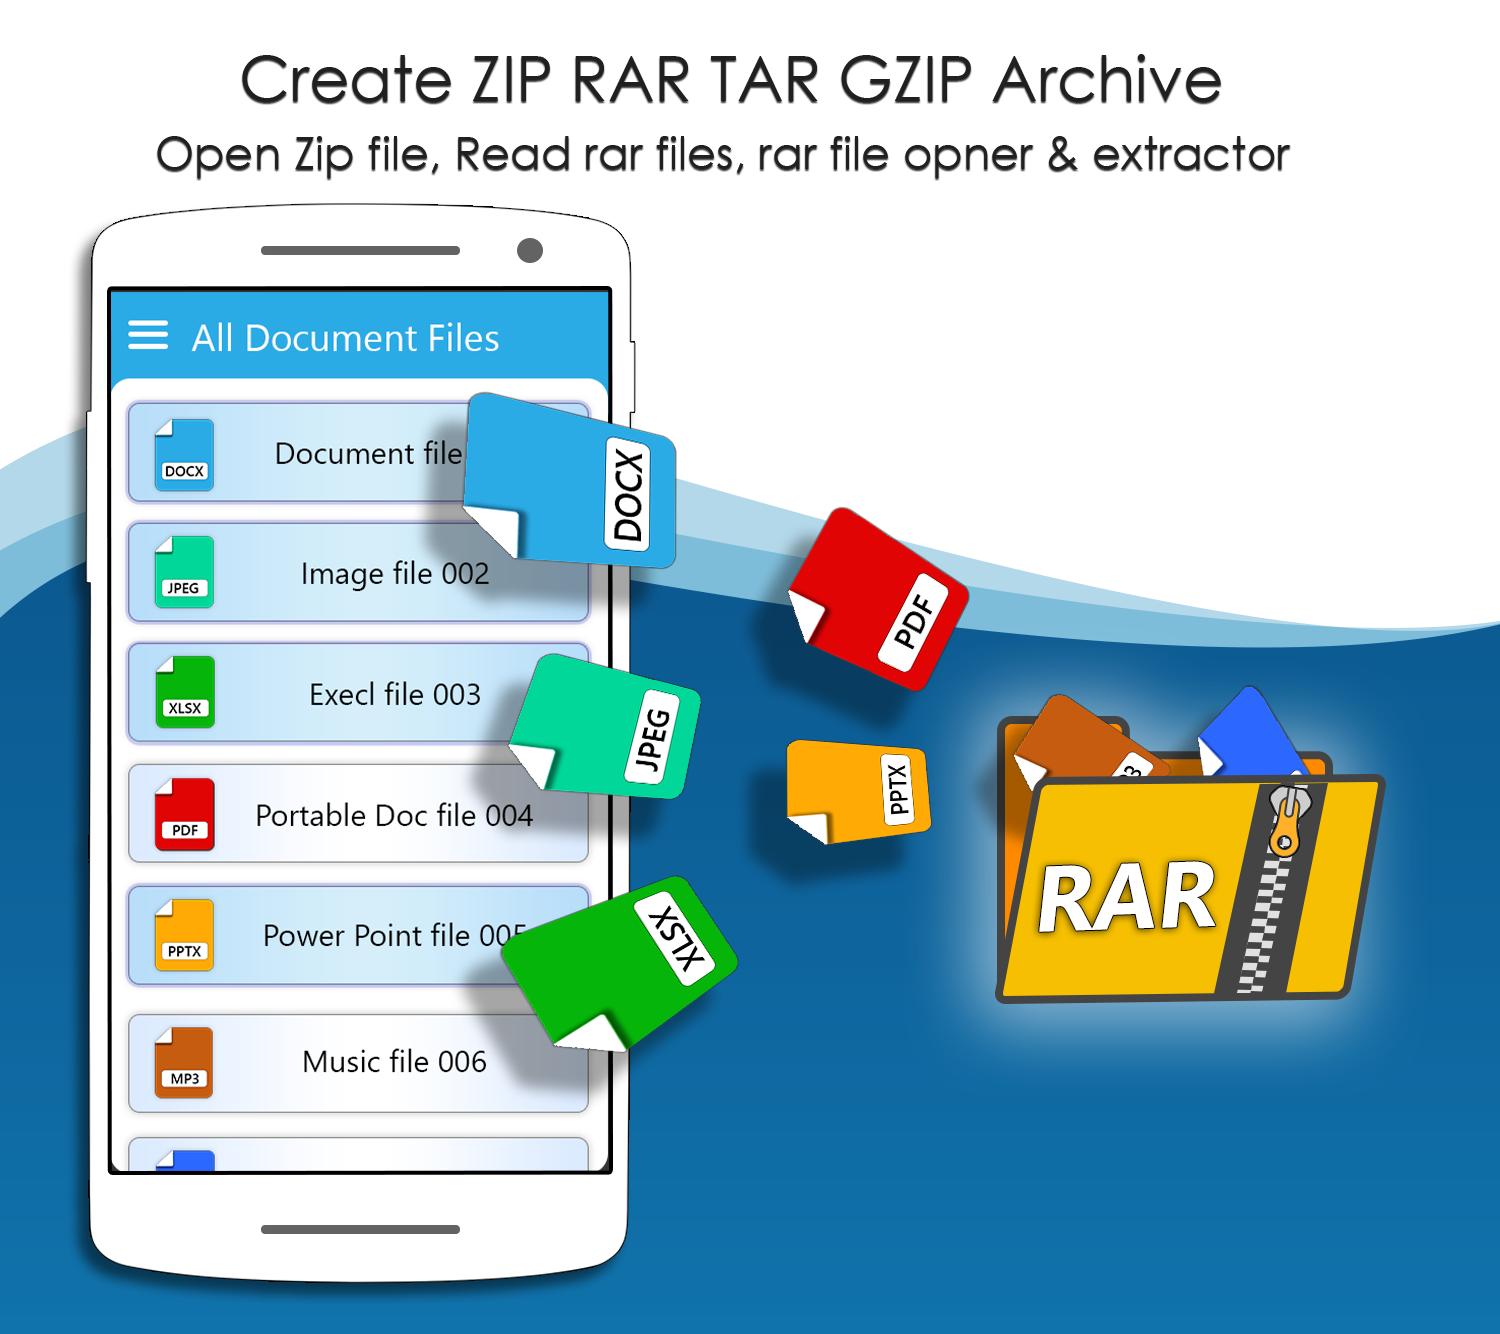 winrar reader for android free download